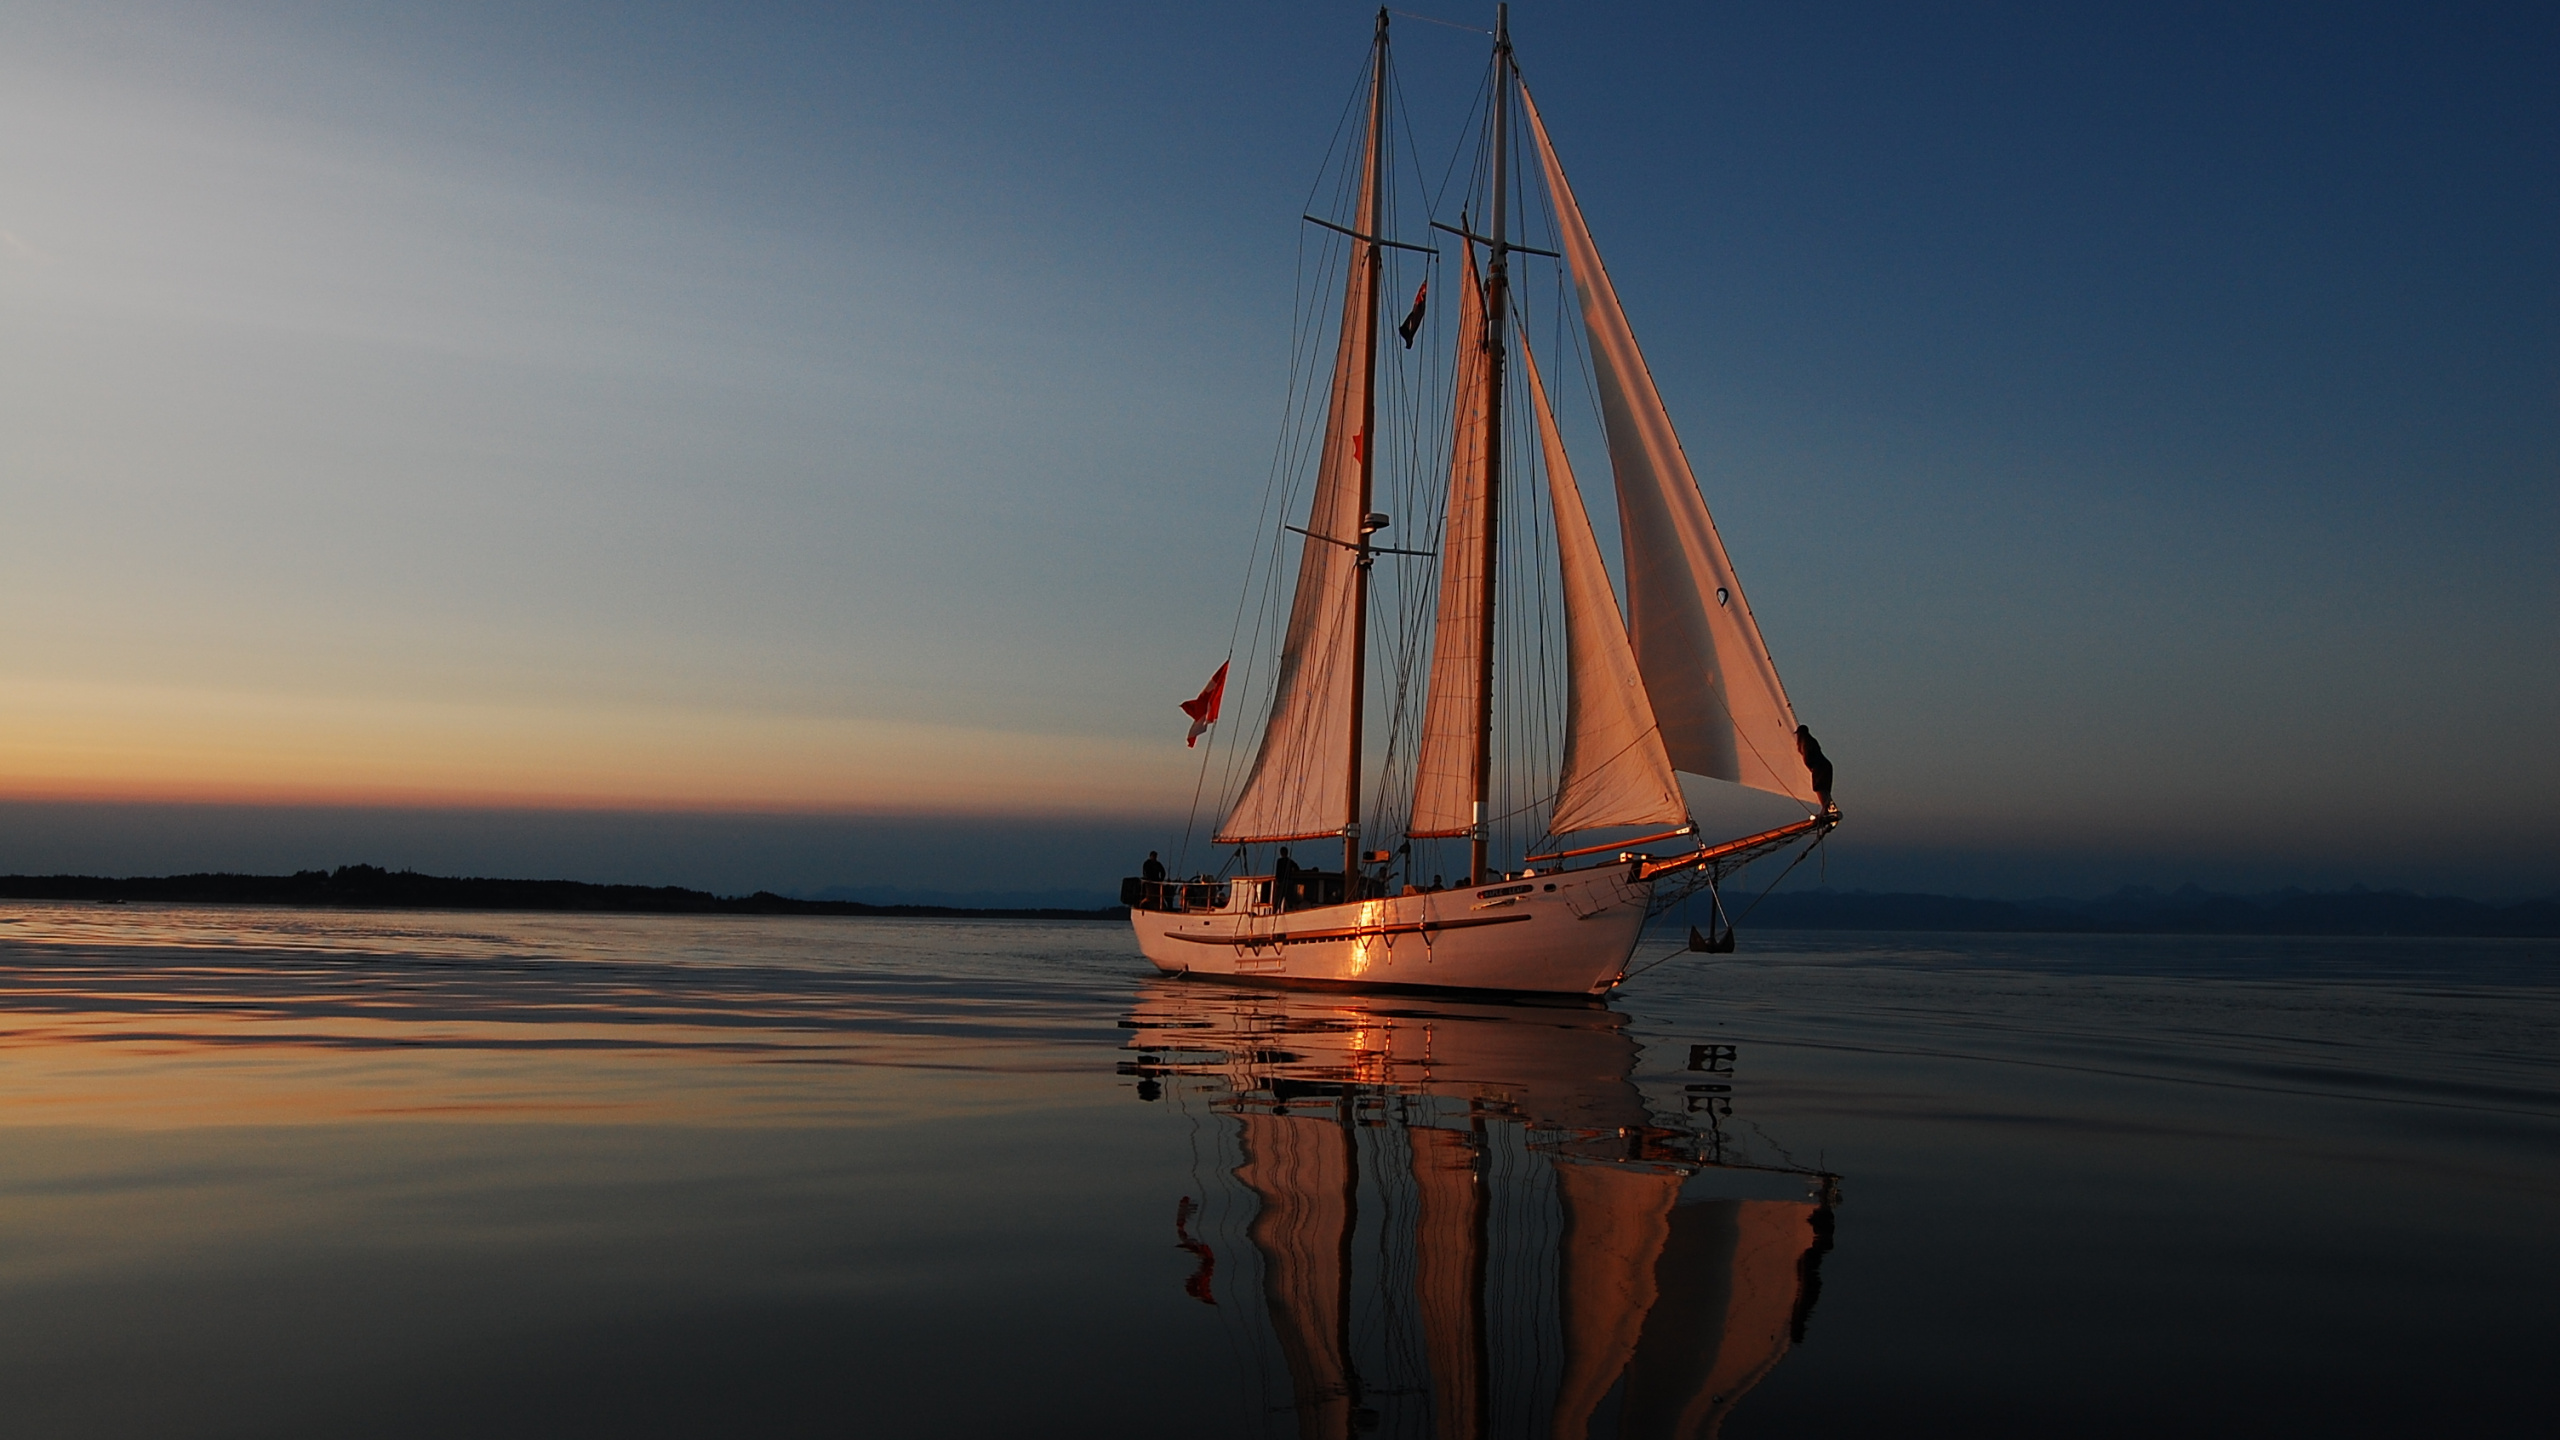 White Sail Boat on Sea During Sunset. Wallpaper in 2560x1440 Resolution